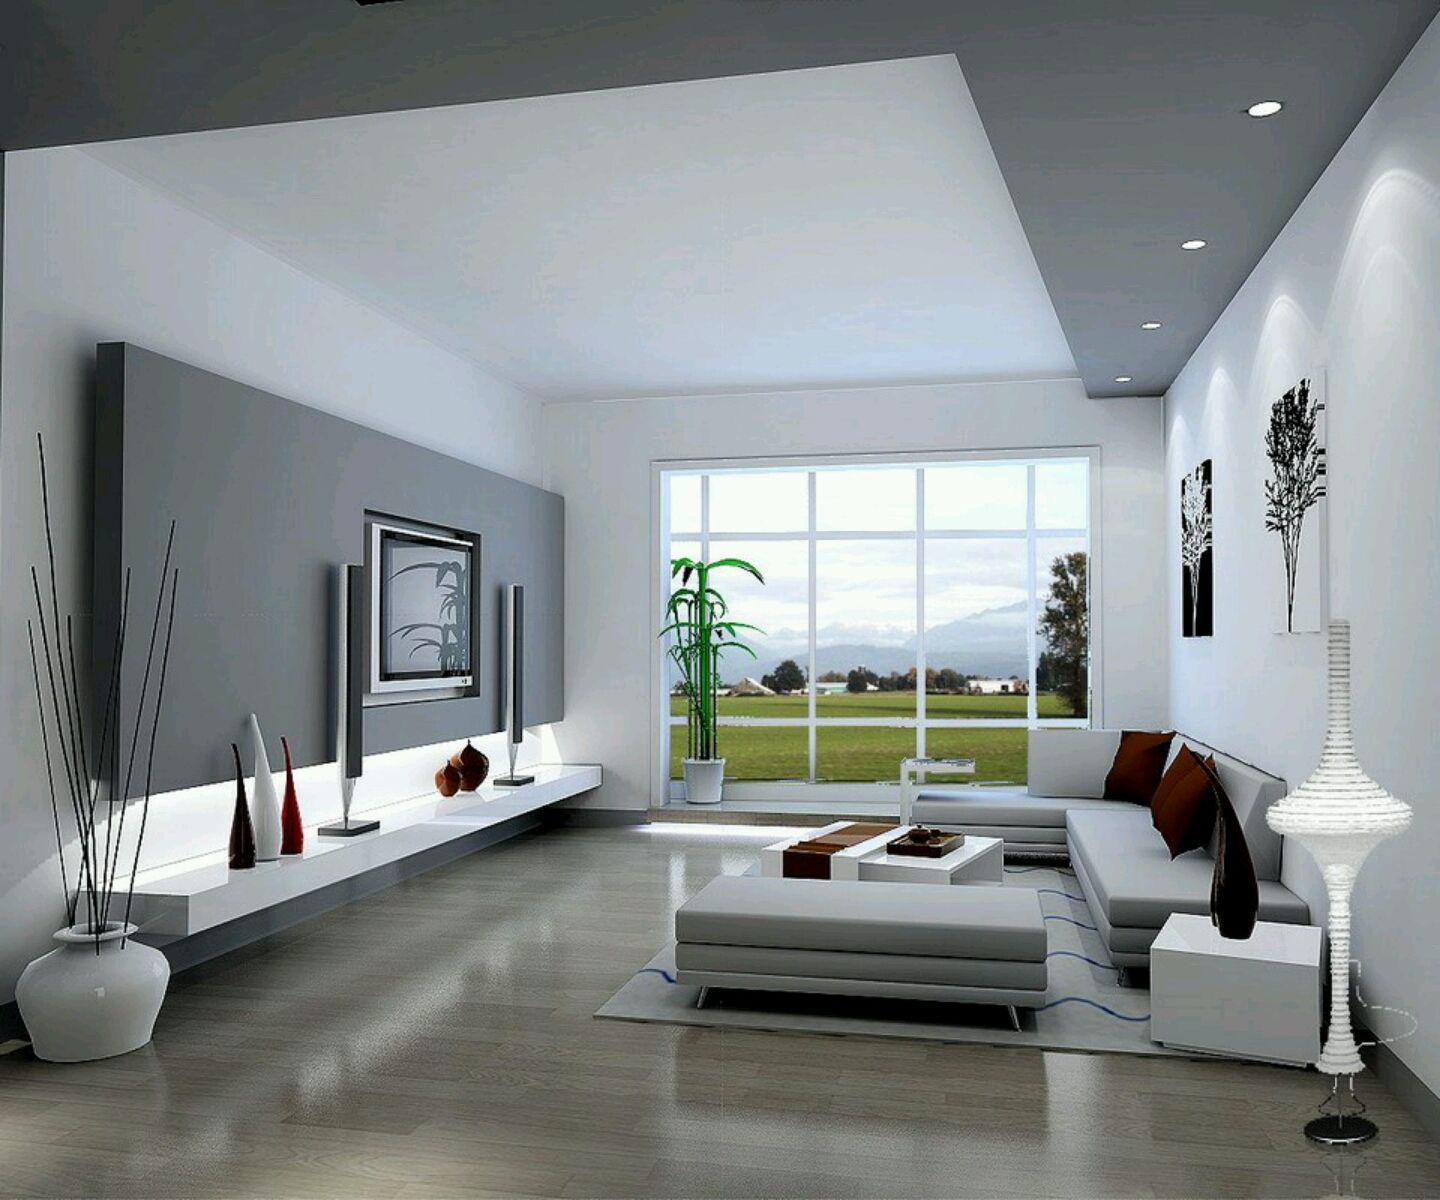 modern interior design ideas for living rooms with regard to Residence  intended for Invigorate Living Room